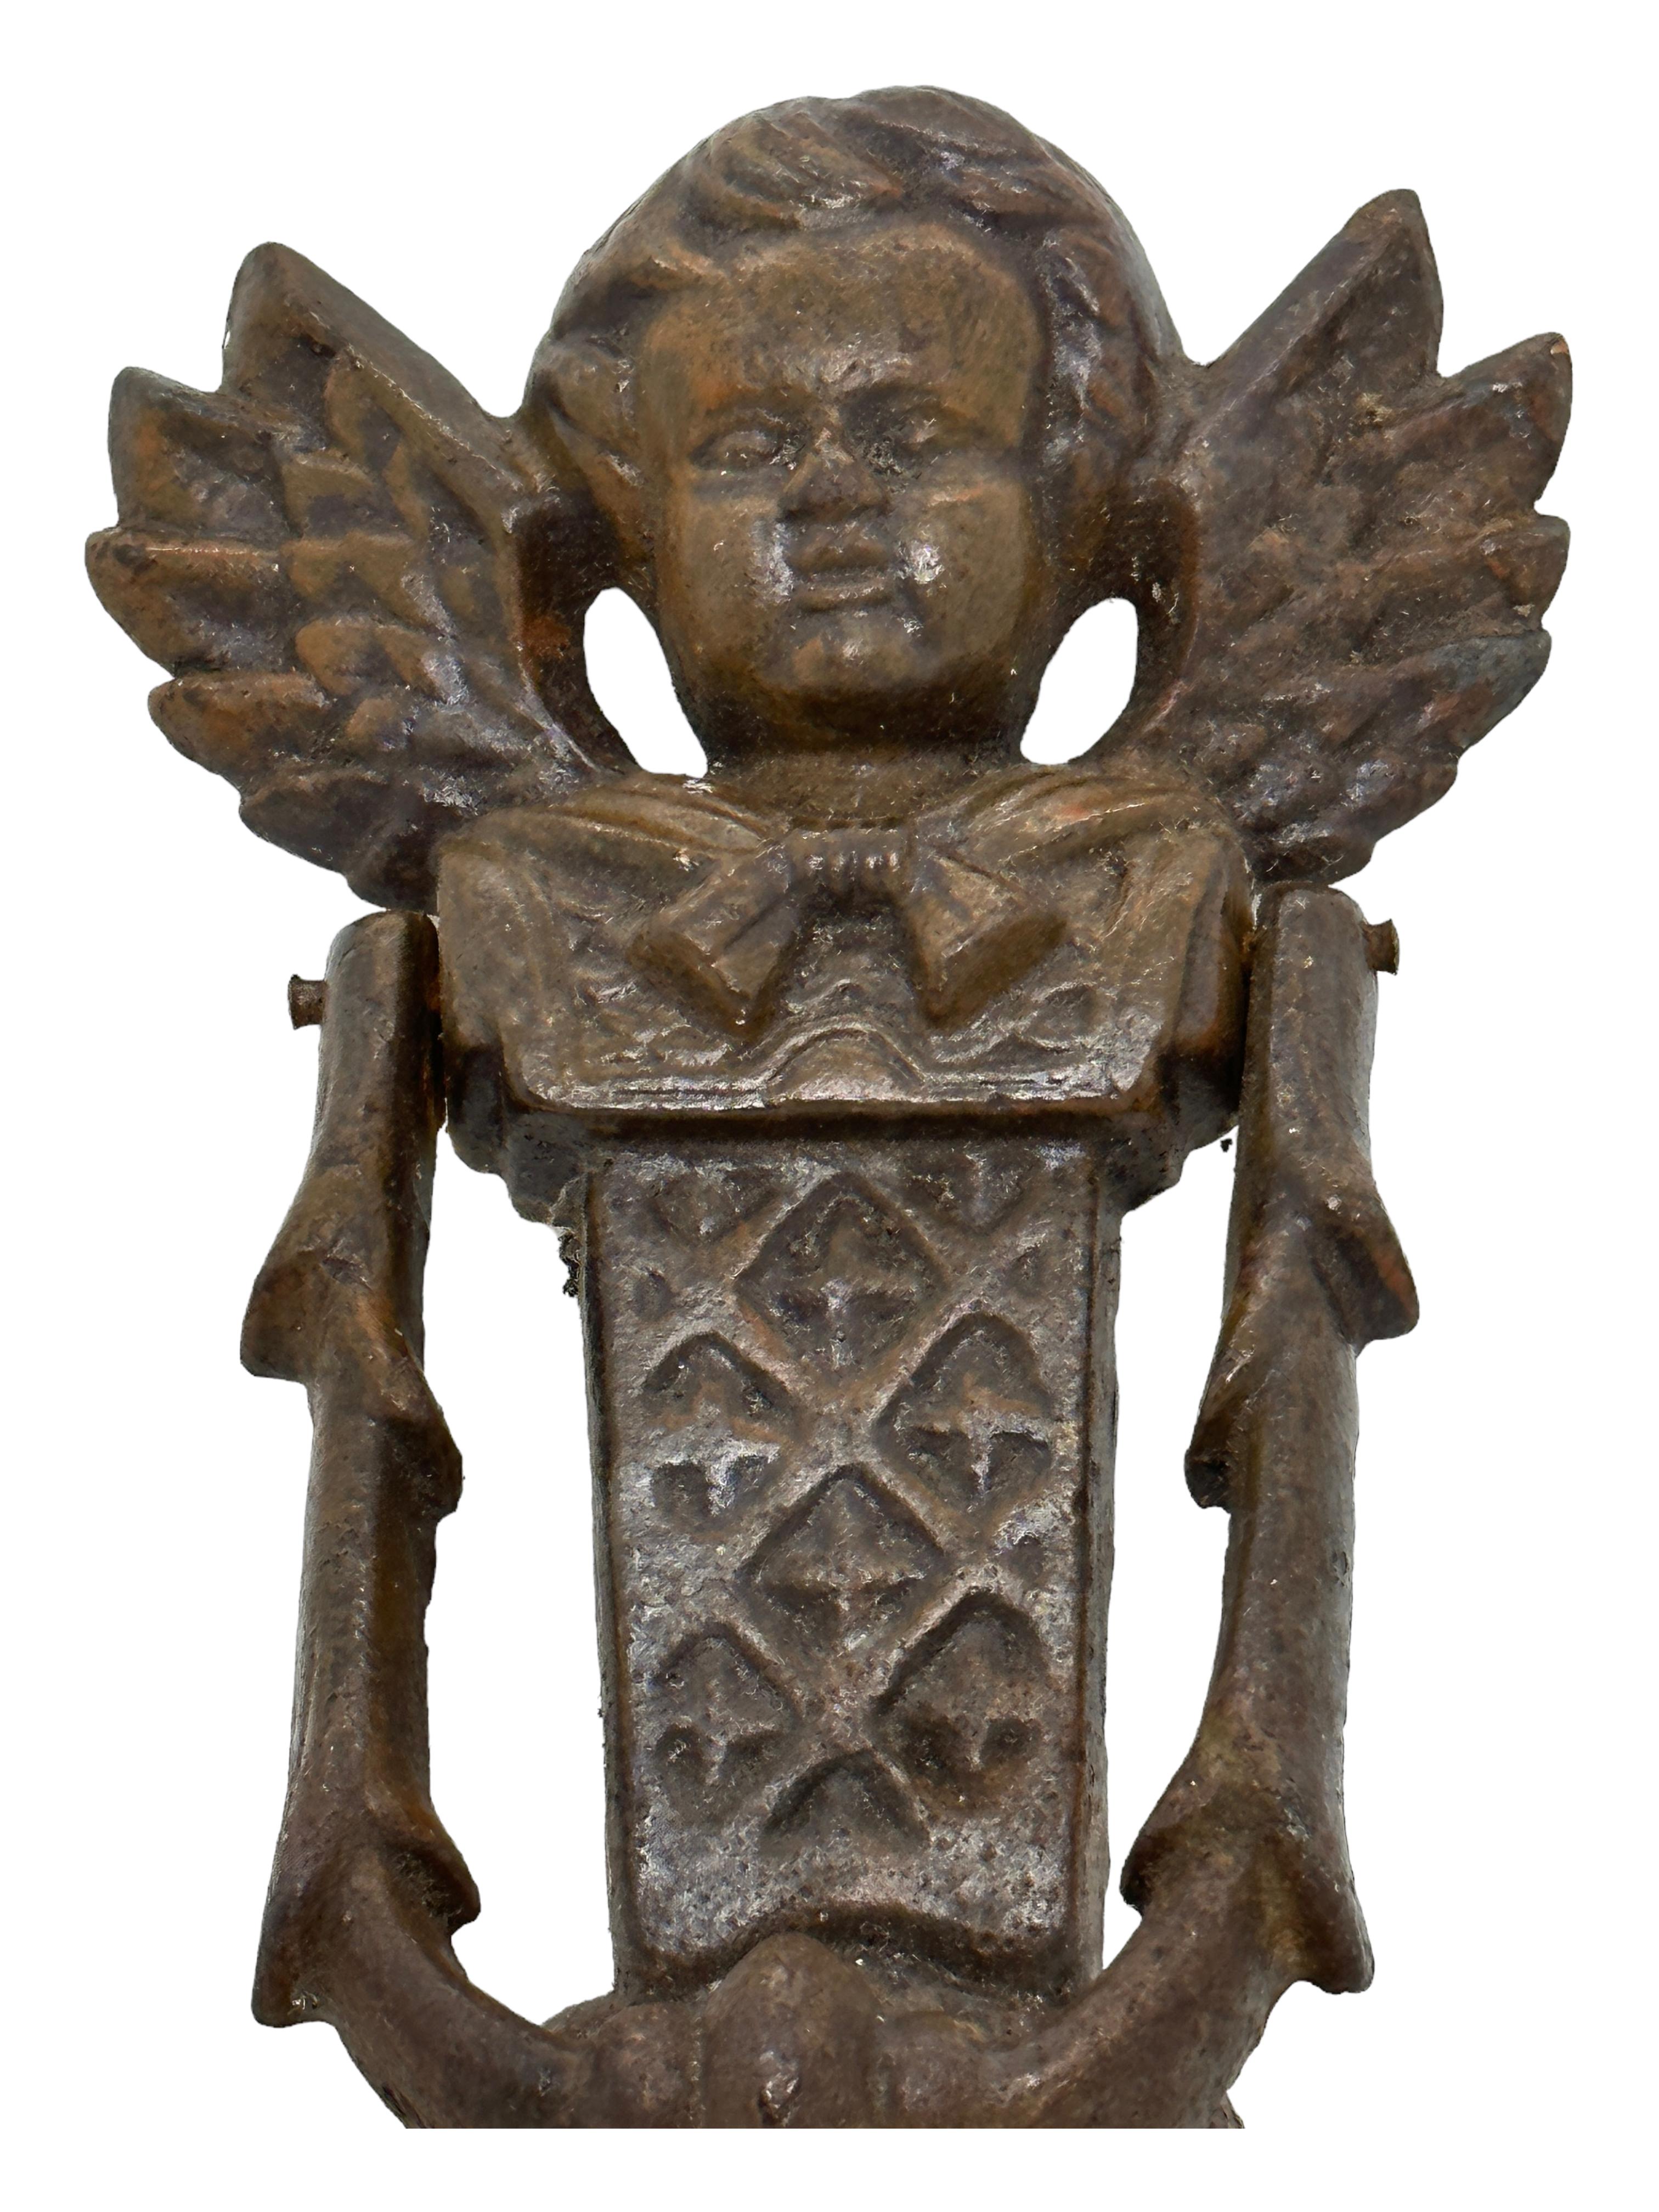 Classic 19th century German cherub angel head door knocker, made of heavy metal (maybe cast iron). Nice addition to your front door. Found at an estate sale in Germany. It is not marked.